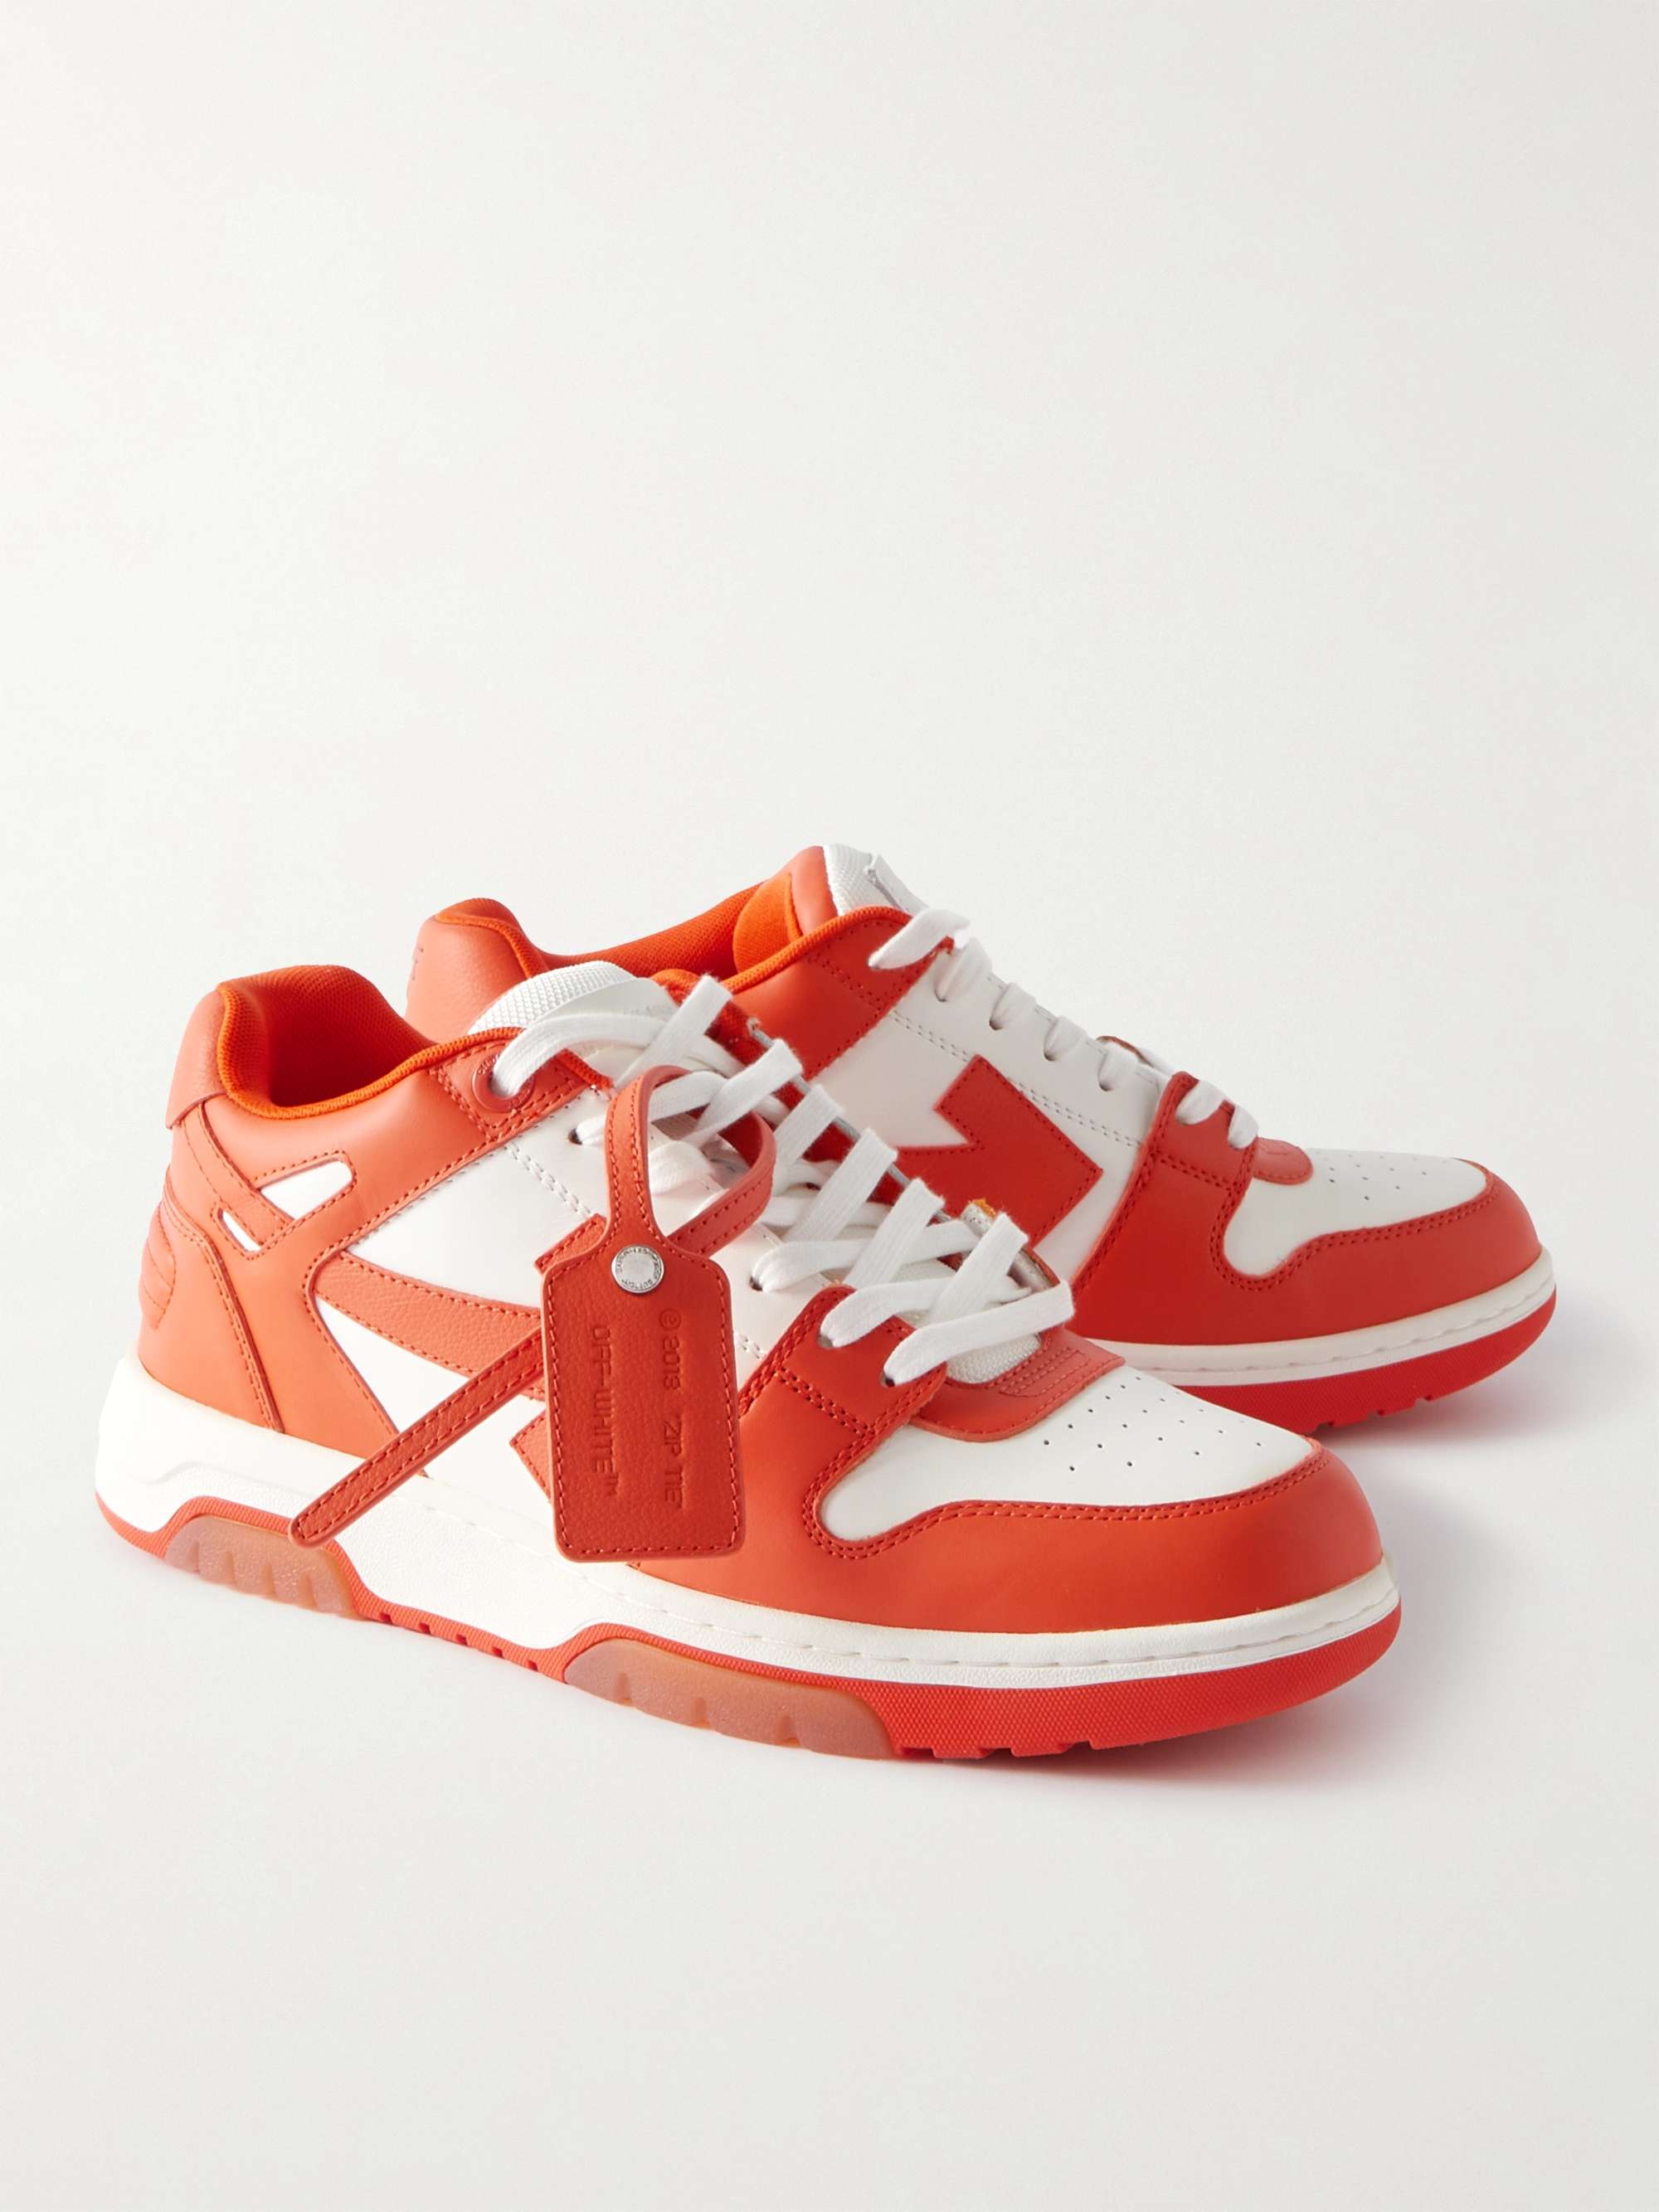 OFF-WHITE Out of Leather Sneakers | MR PORTER